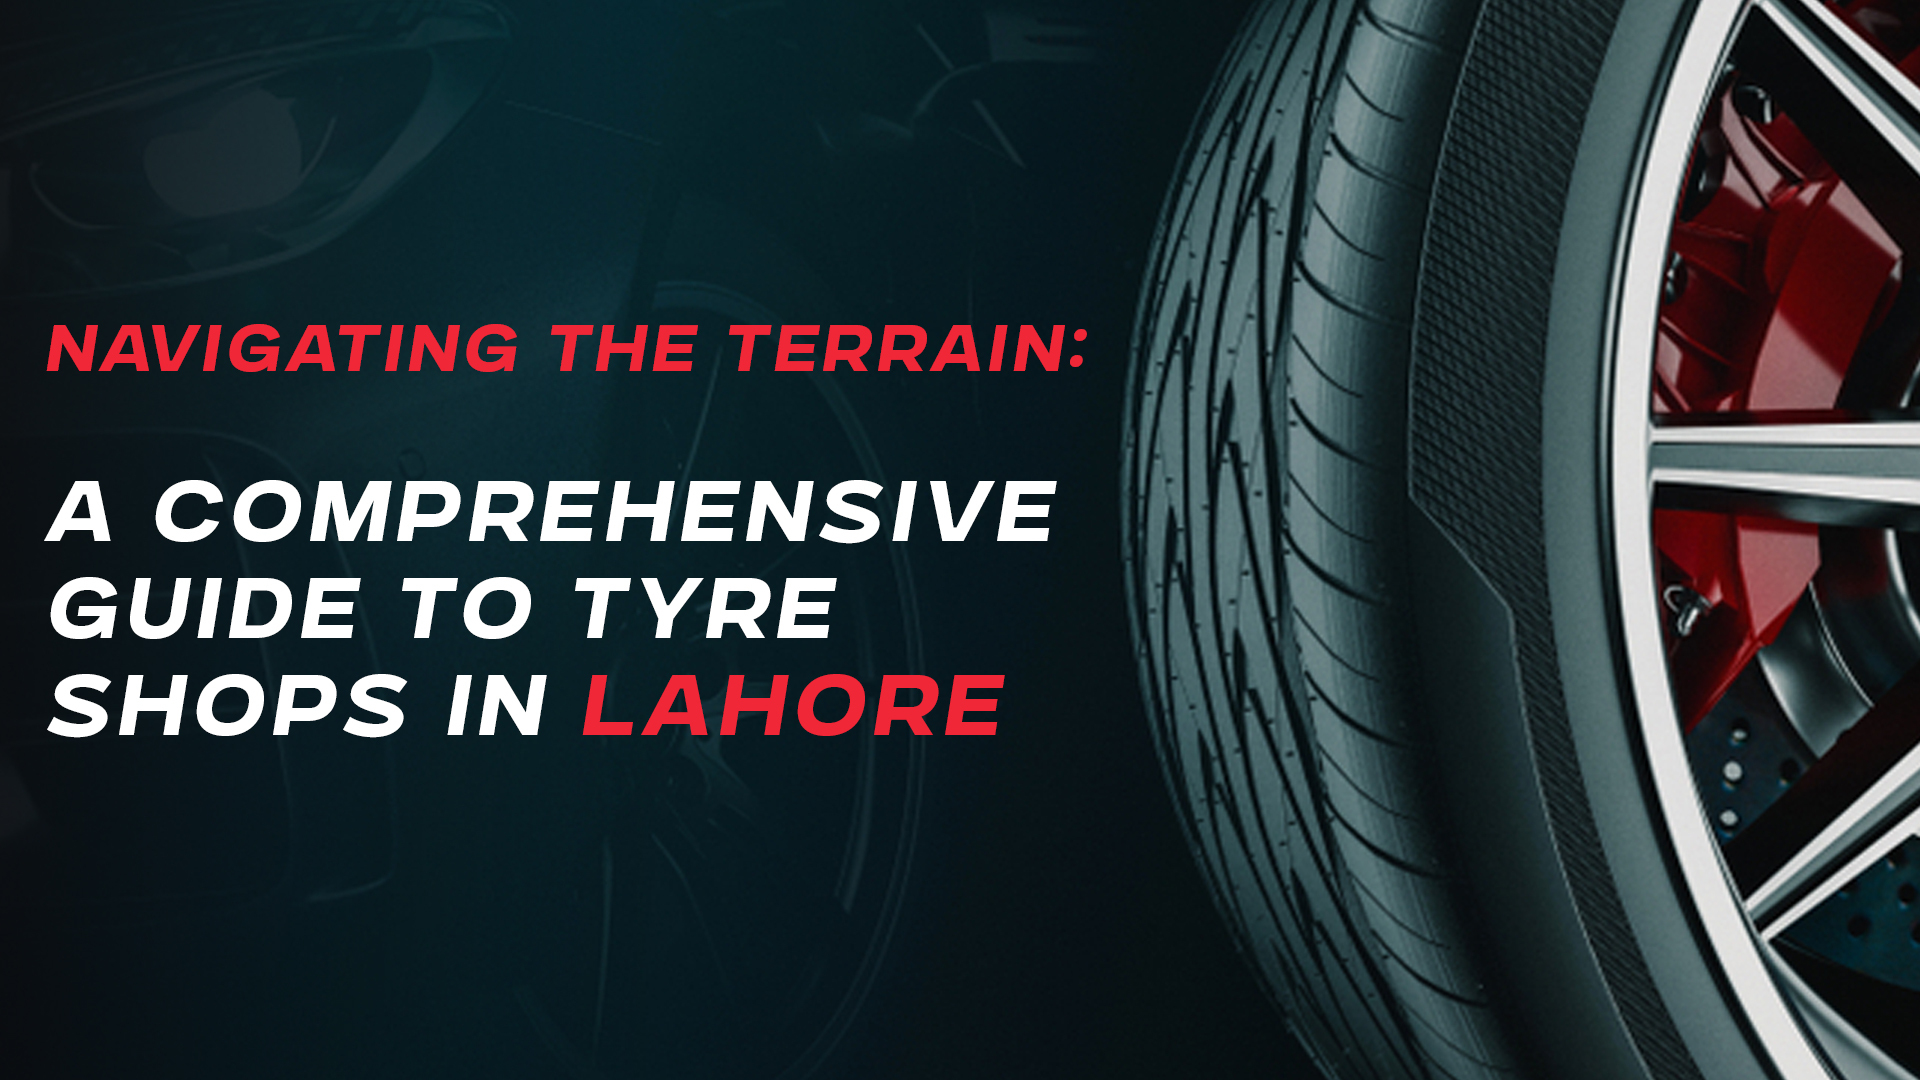 Navigating the Terrain: A Comprehensive Guide to Tyre Shops in Lahore